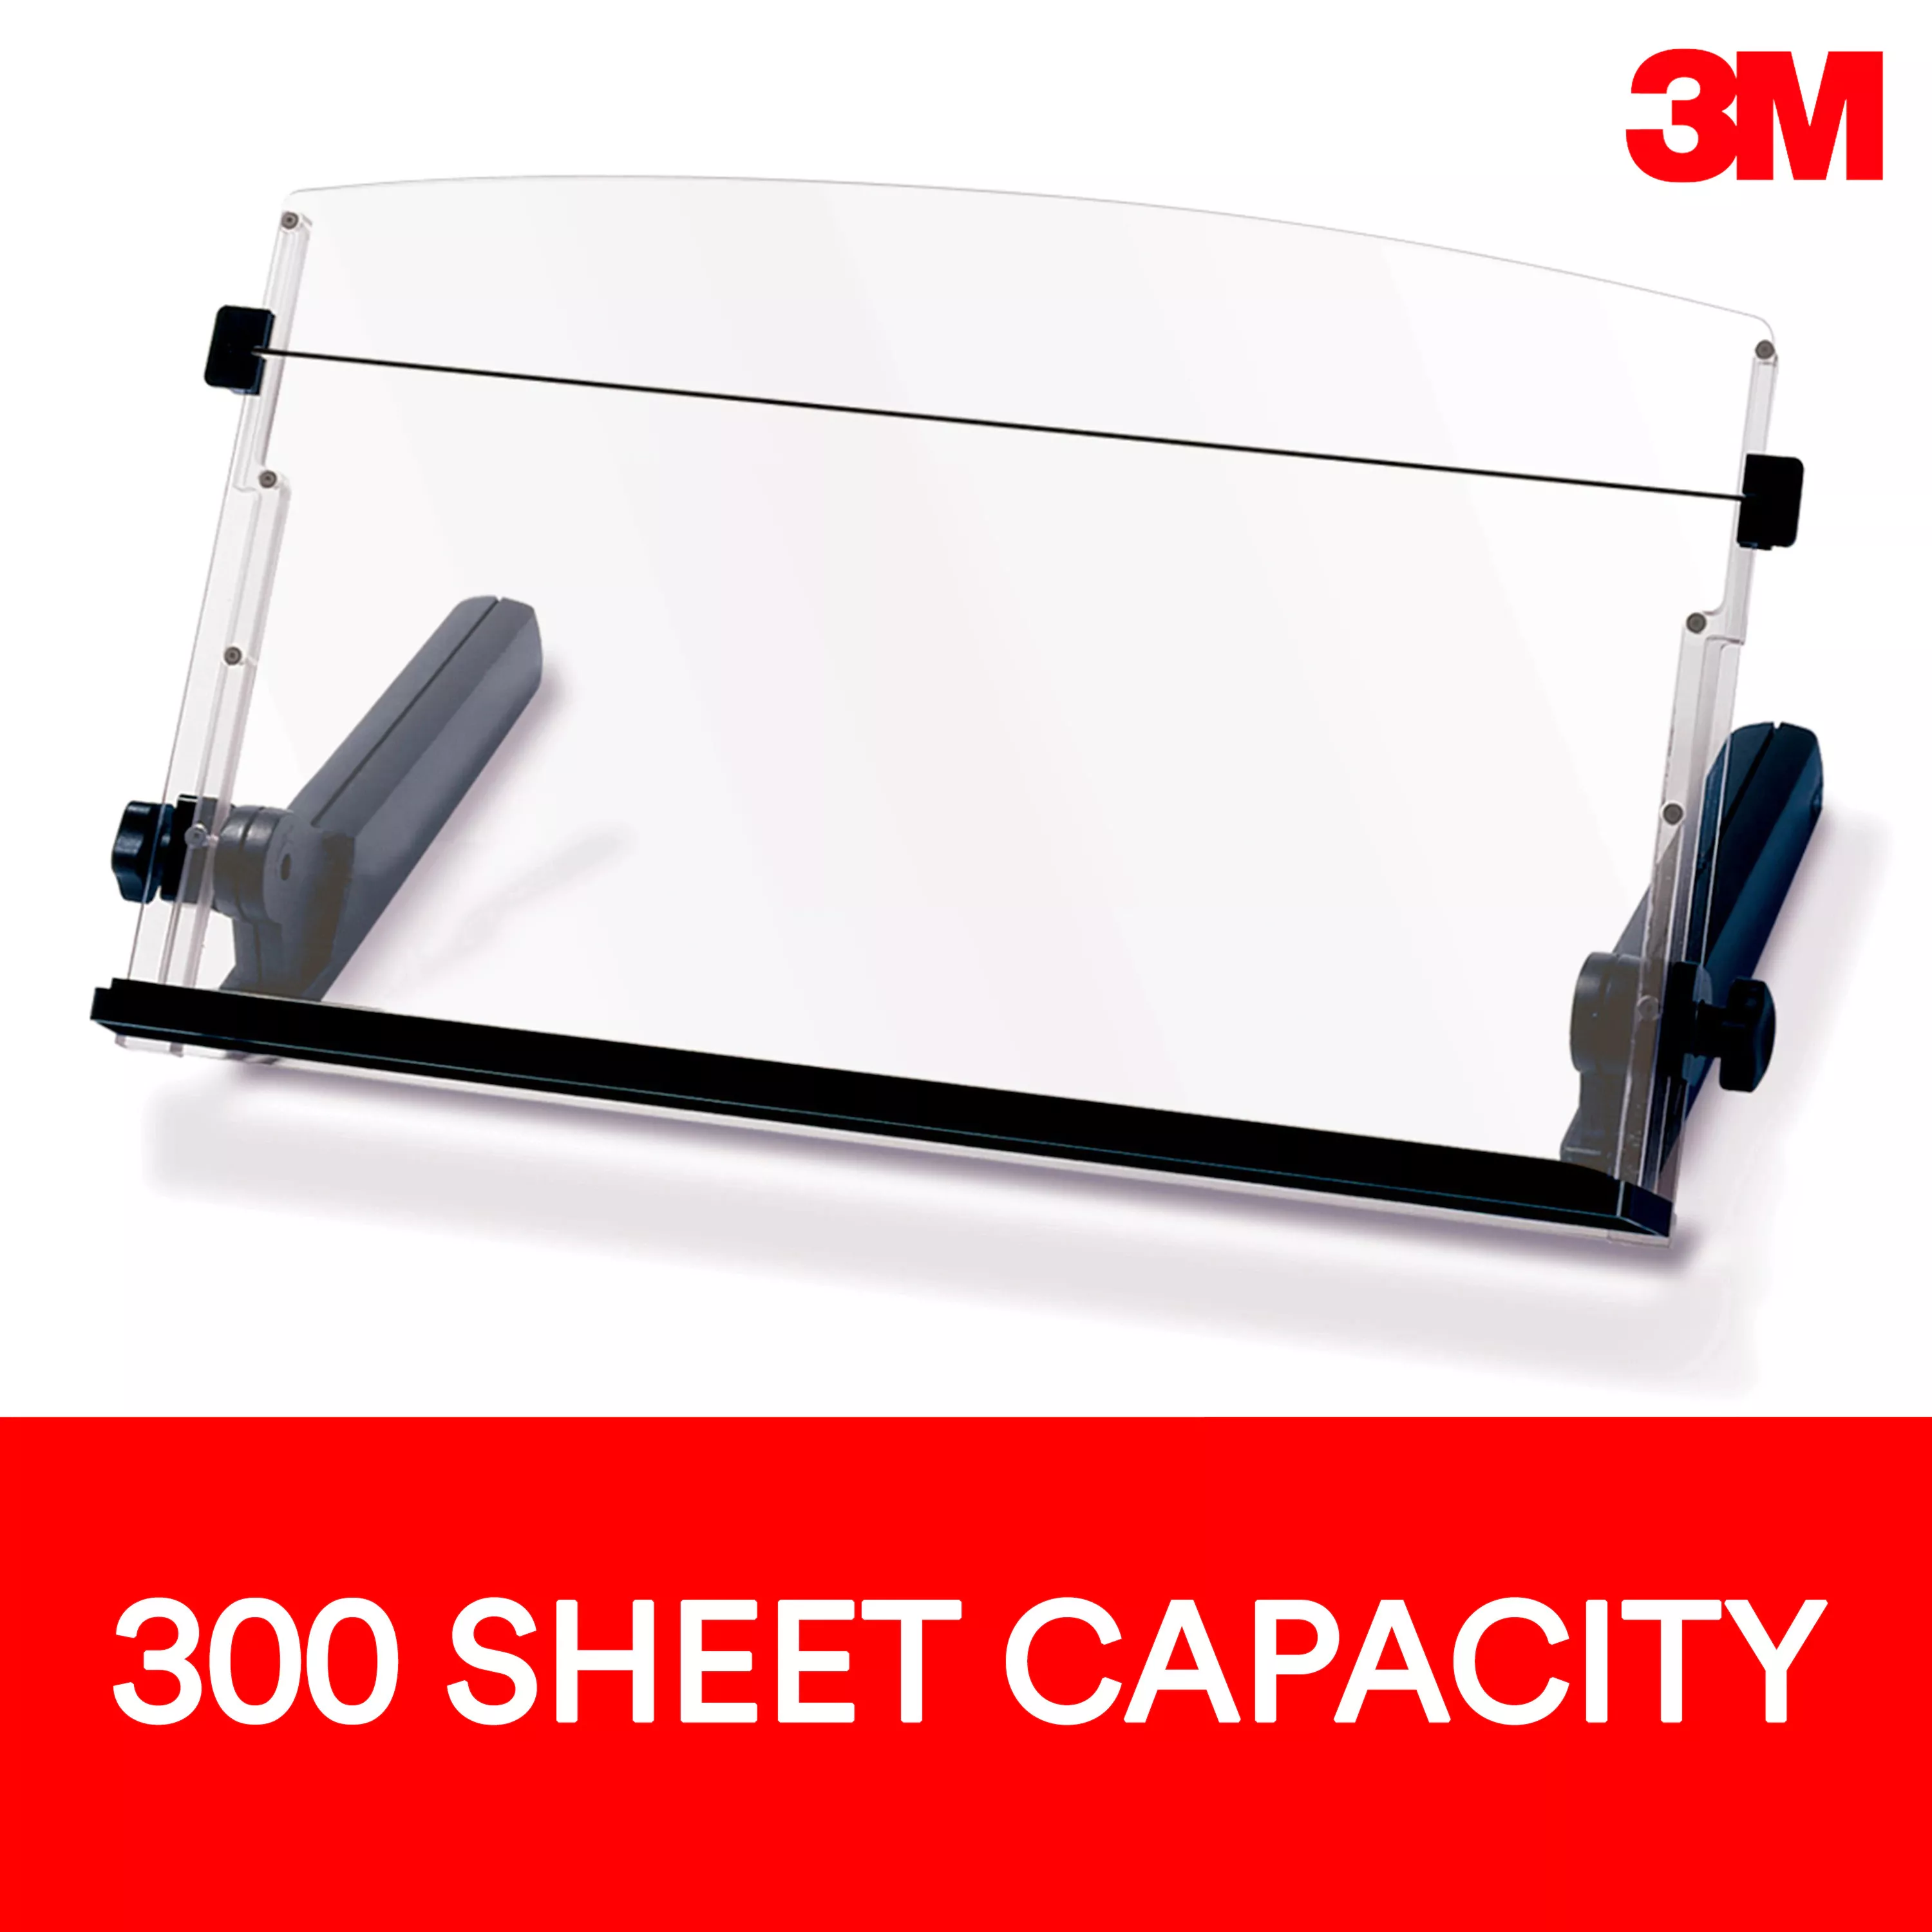 3M™ Adjustable In-Line Document Holder with Elastic Line Guide, Black,
DH640